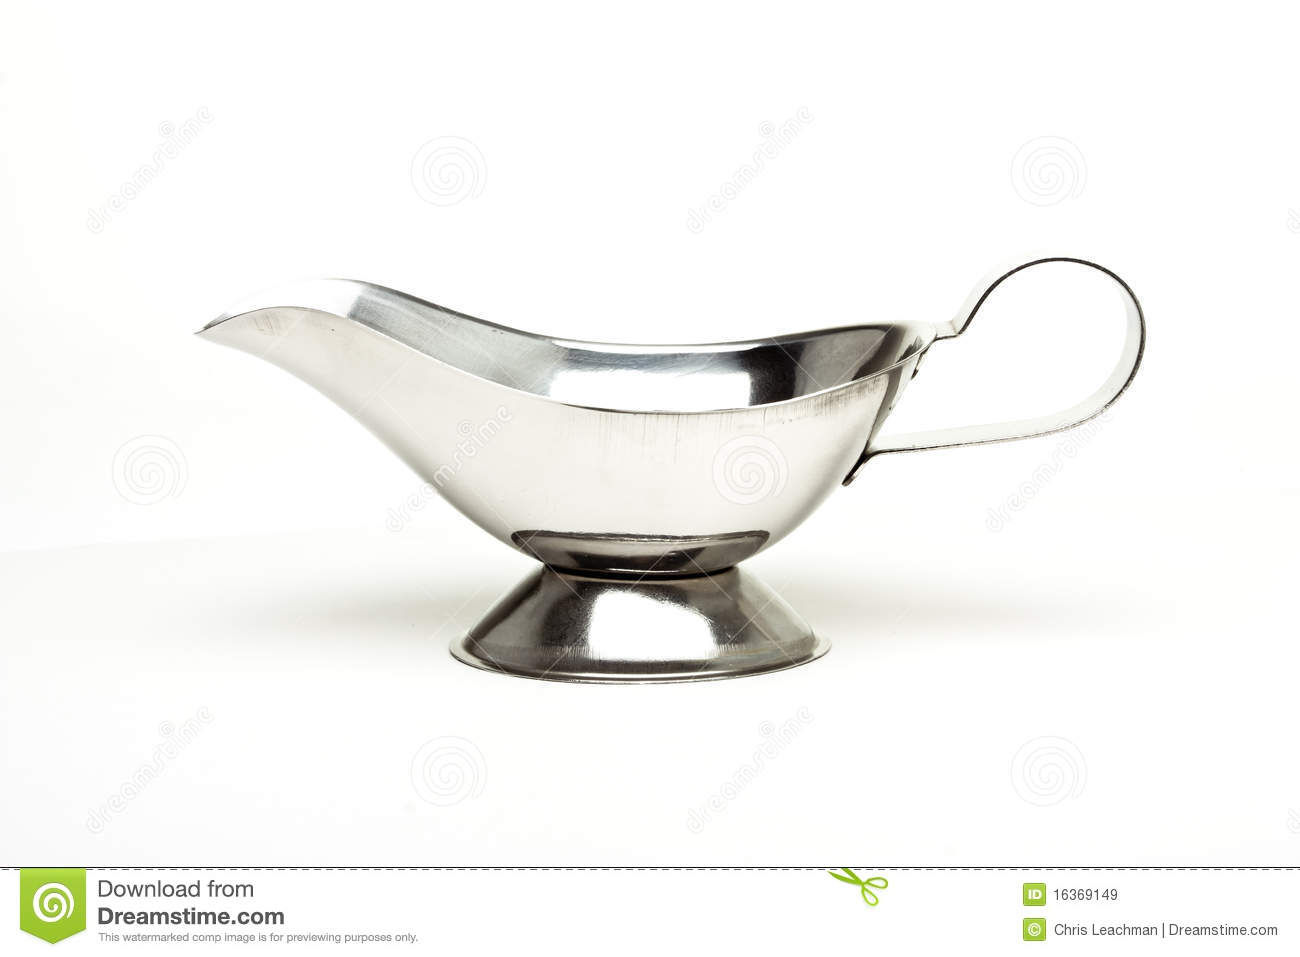 Gravy Boat Royalty Free Stock Images   Image  16369149